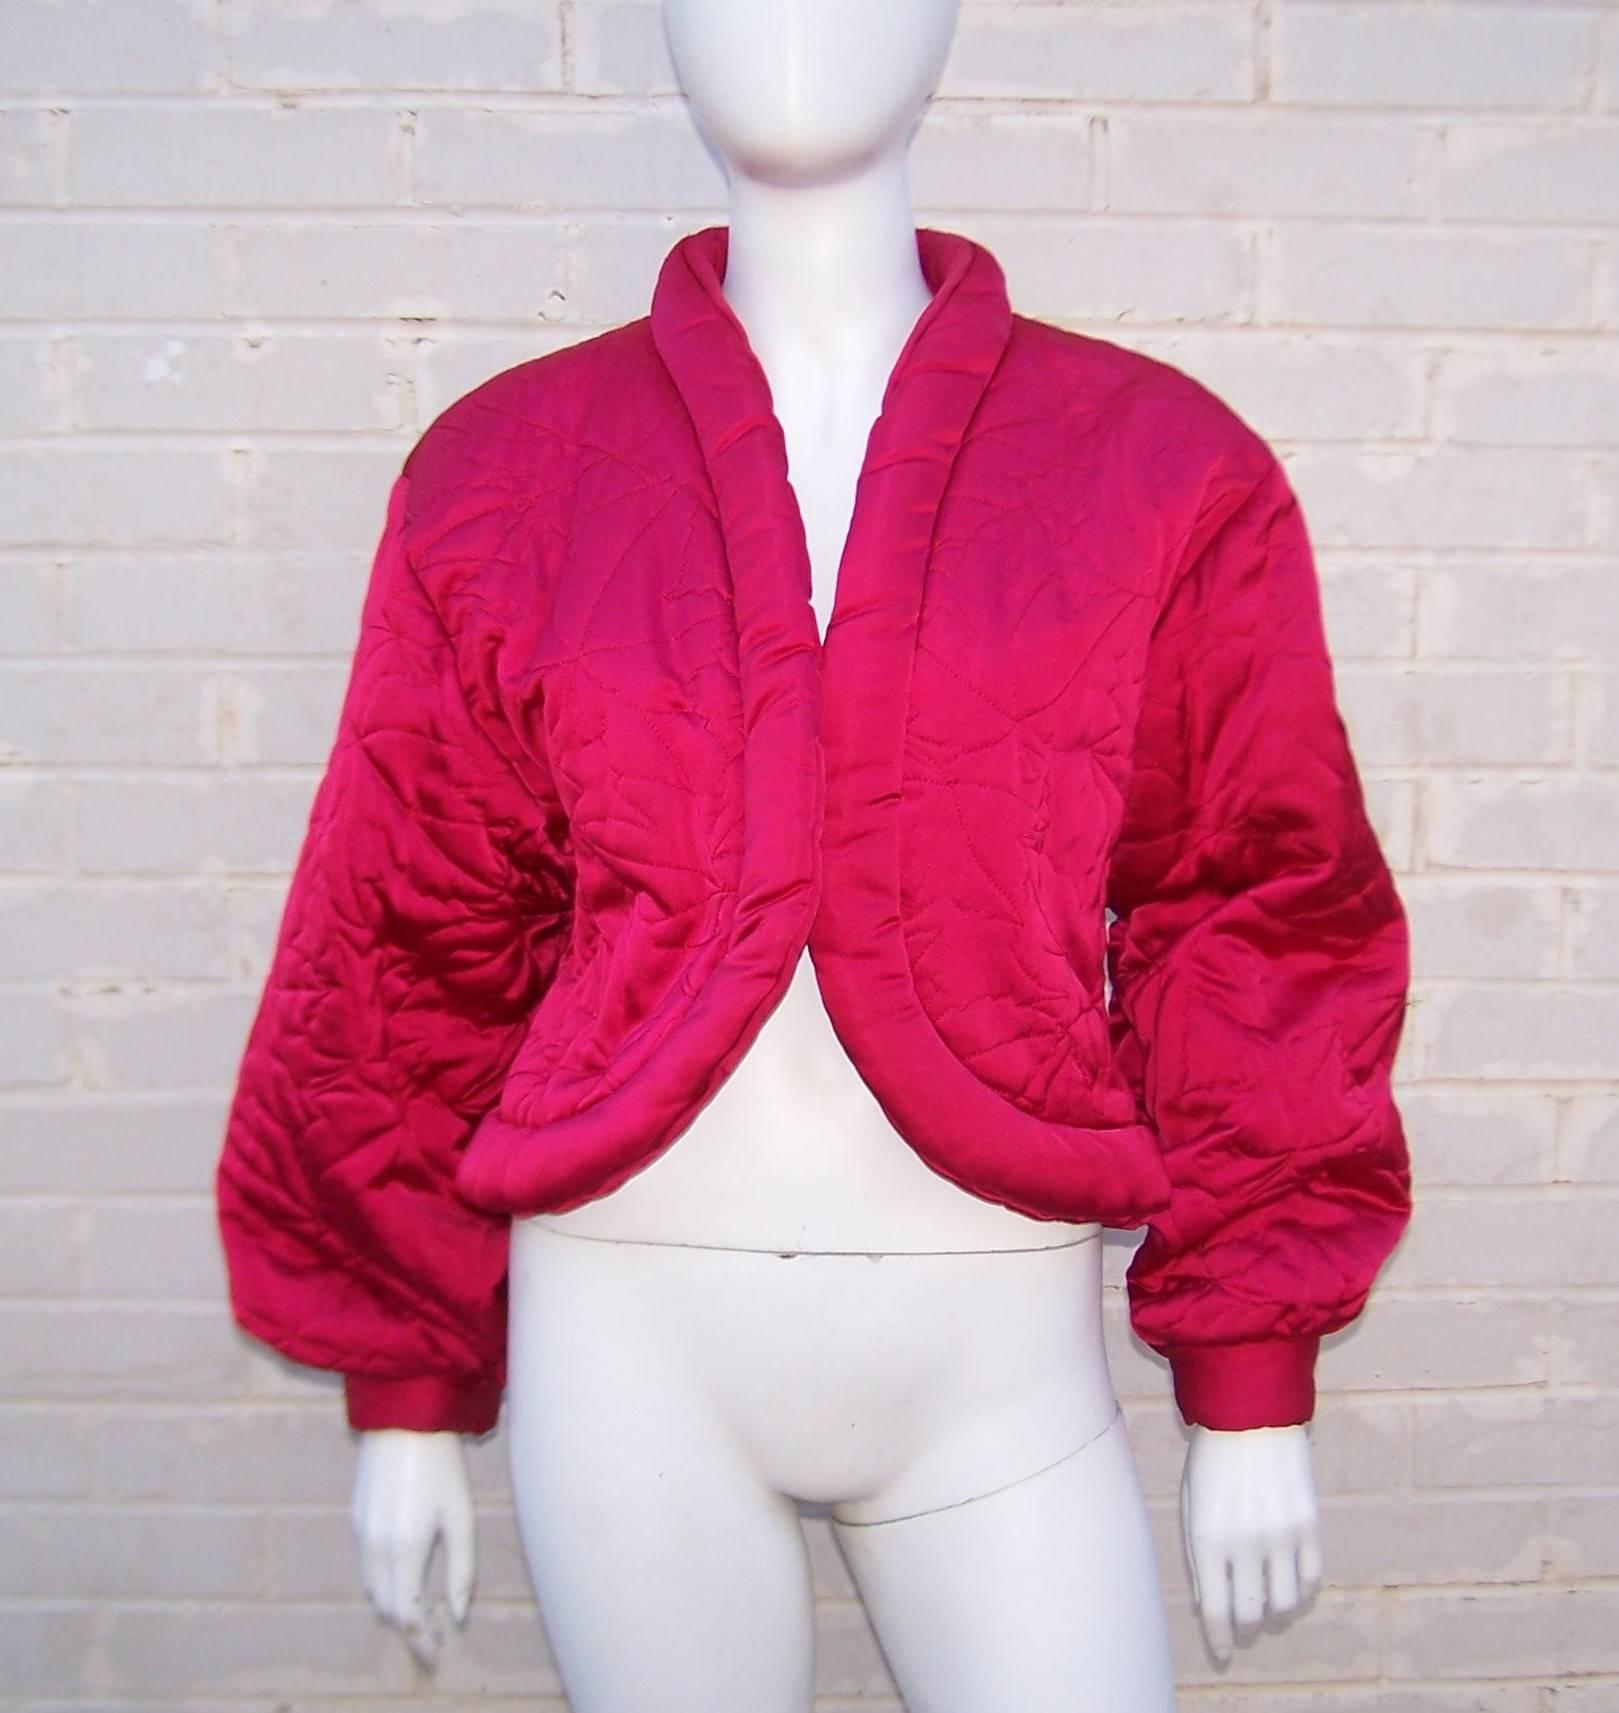 Get it while it's hot!  Hot pink, that is!  This cozy cropped jacket has all the comfort of a modern day puffer but with the expert tailoring of Guy Laroche.  The fuchsia pink satin is quilted and styled to create a cutaway look that can go dressy